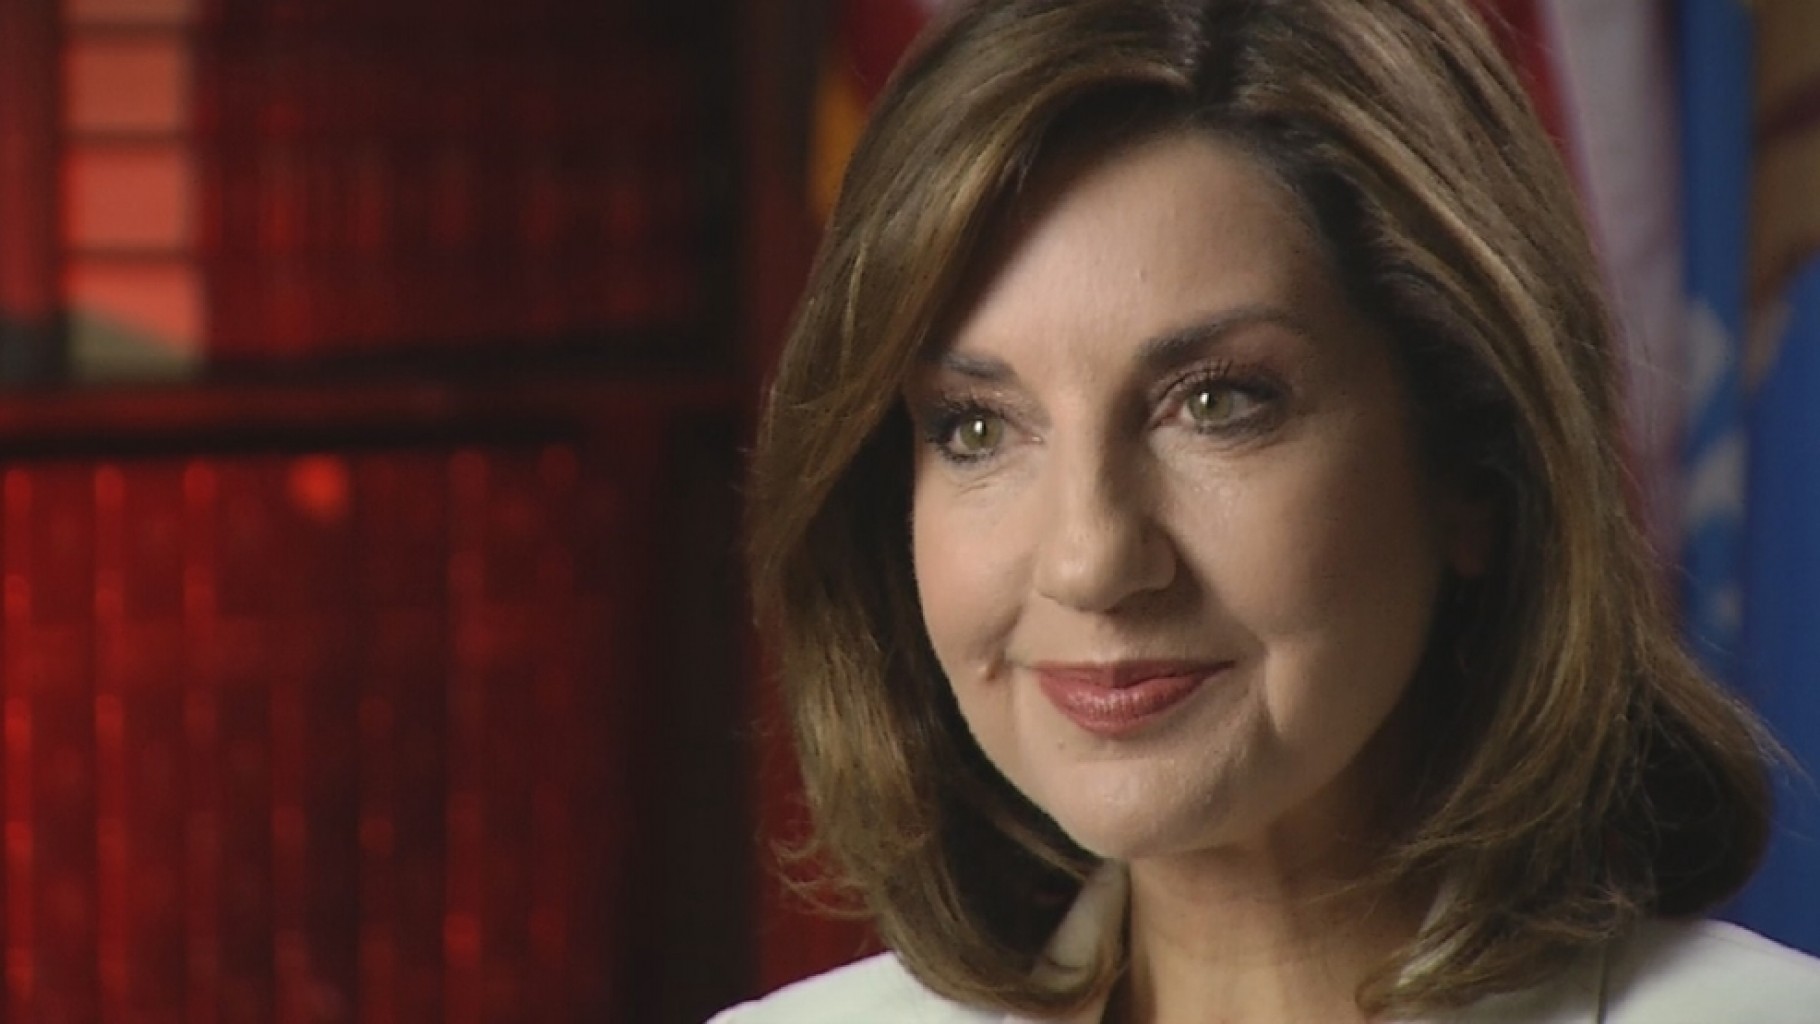 Hofmeister hails court decision clearing way for Teacher pay raise